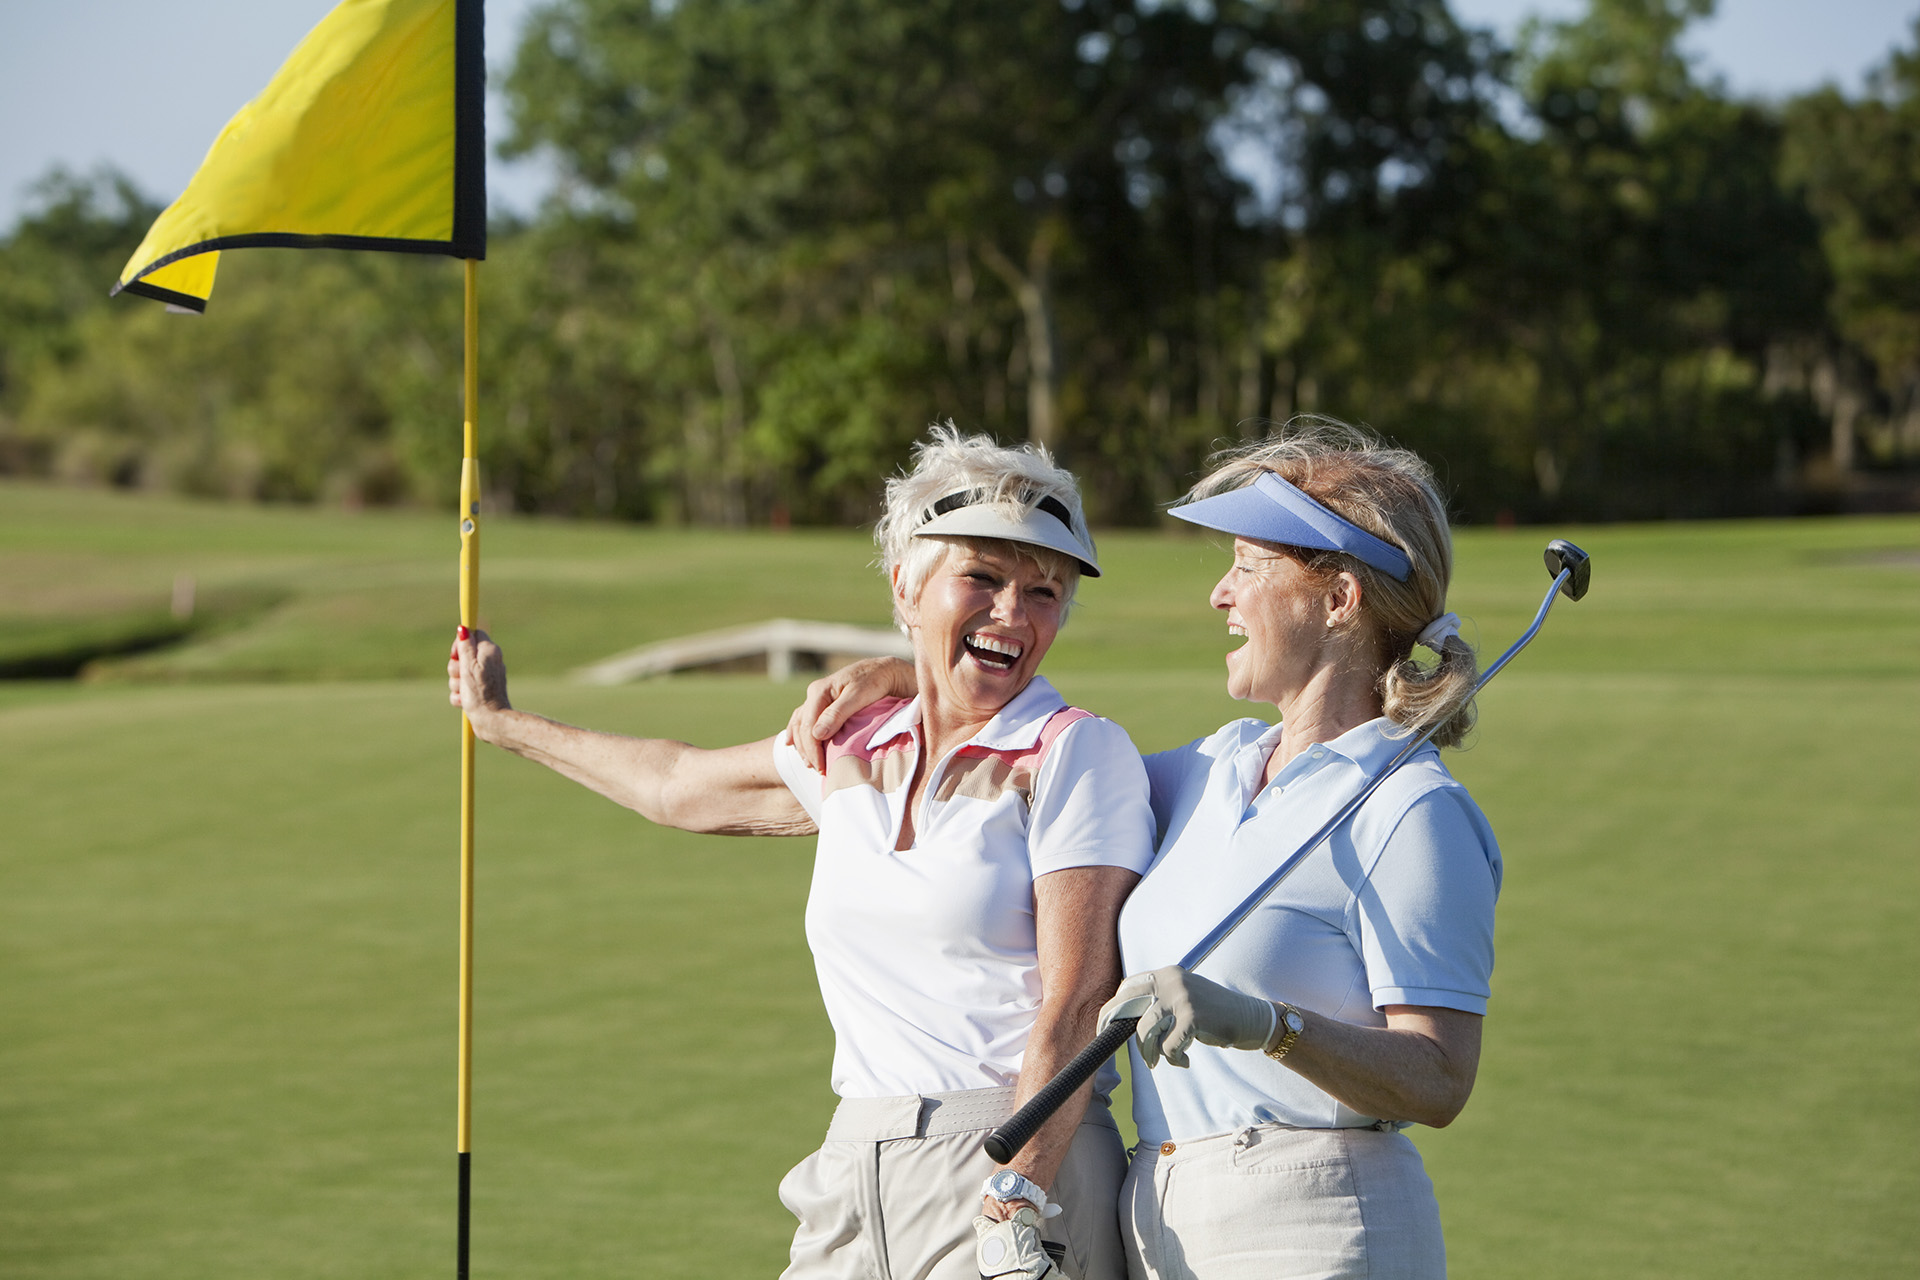 Ladies' playing golf at Addison Reserve in Florida